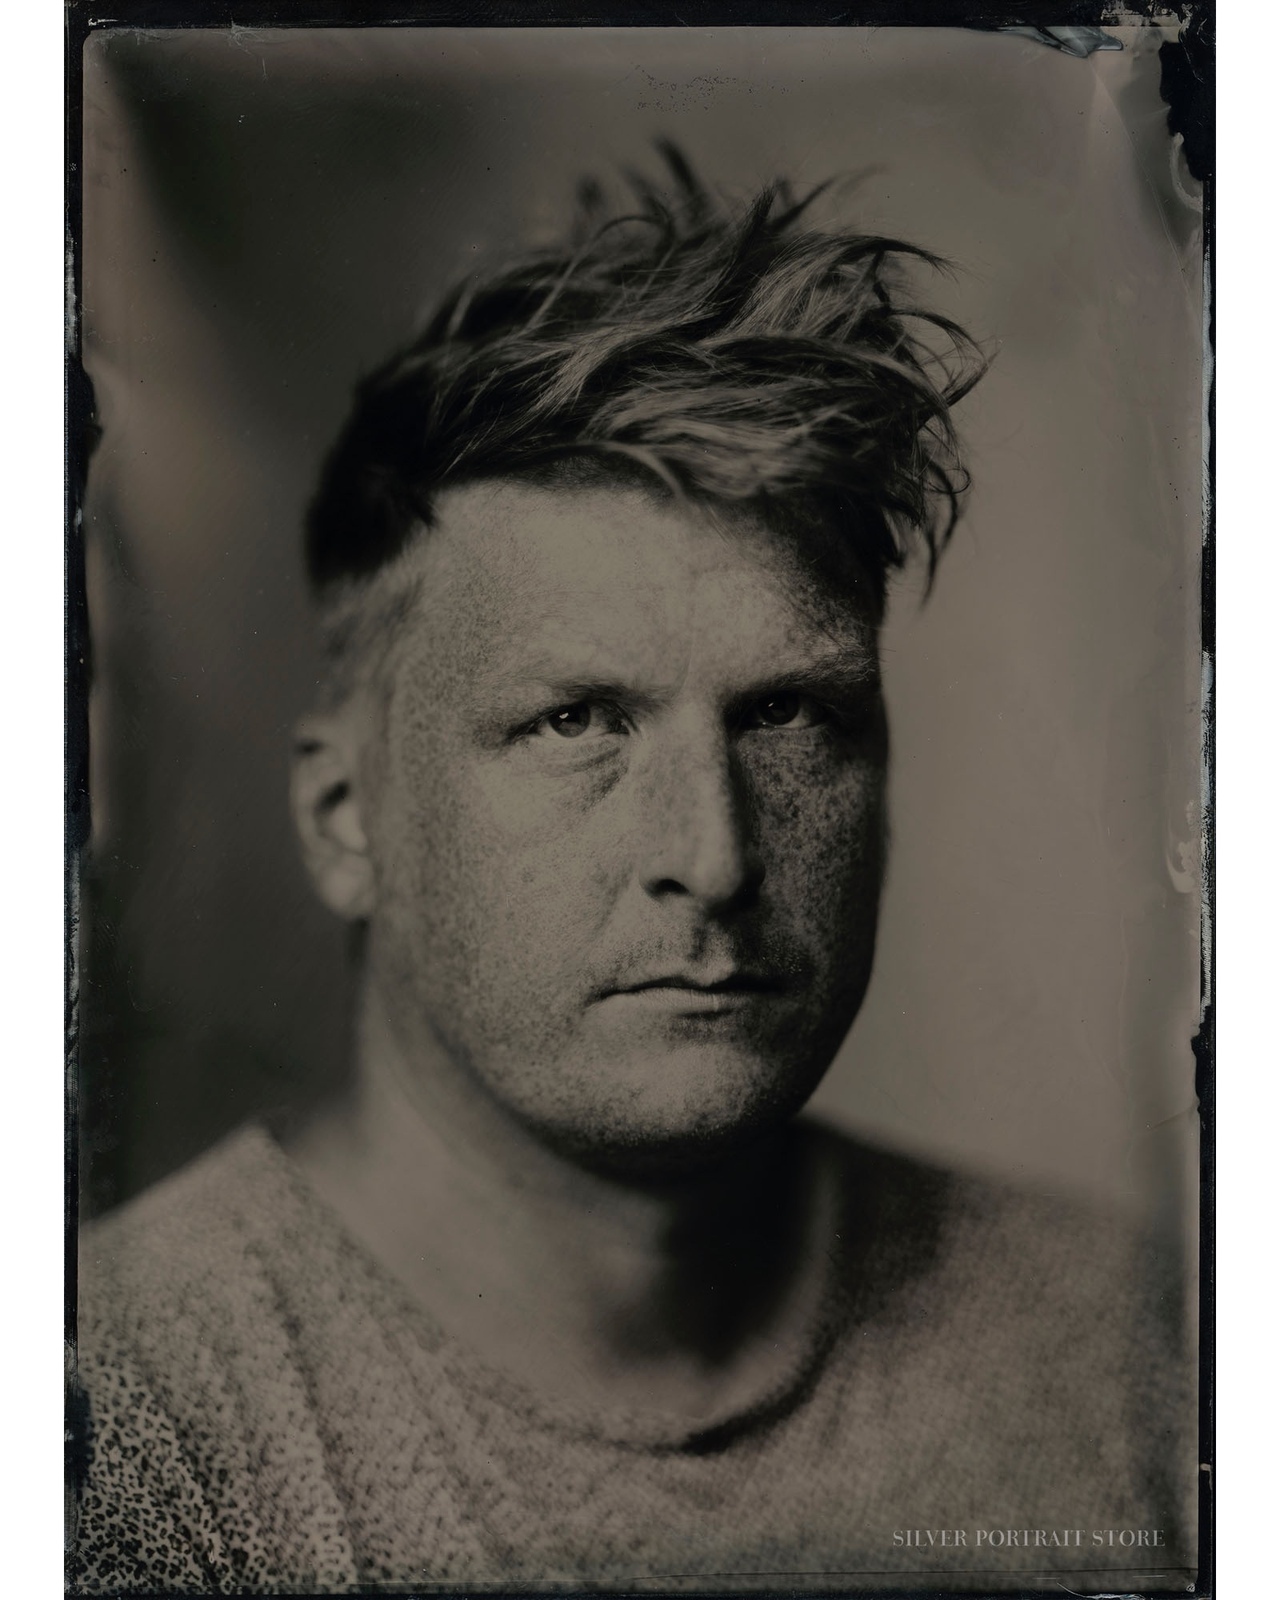 Pieter-Silver Portrait Store-Wet plate collodion-clear glass Ambrotype 13 x 18 cm.